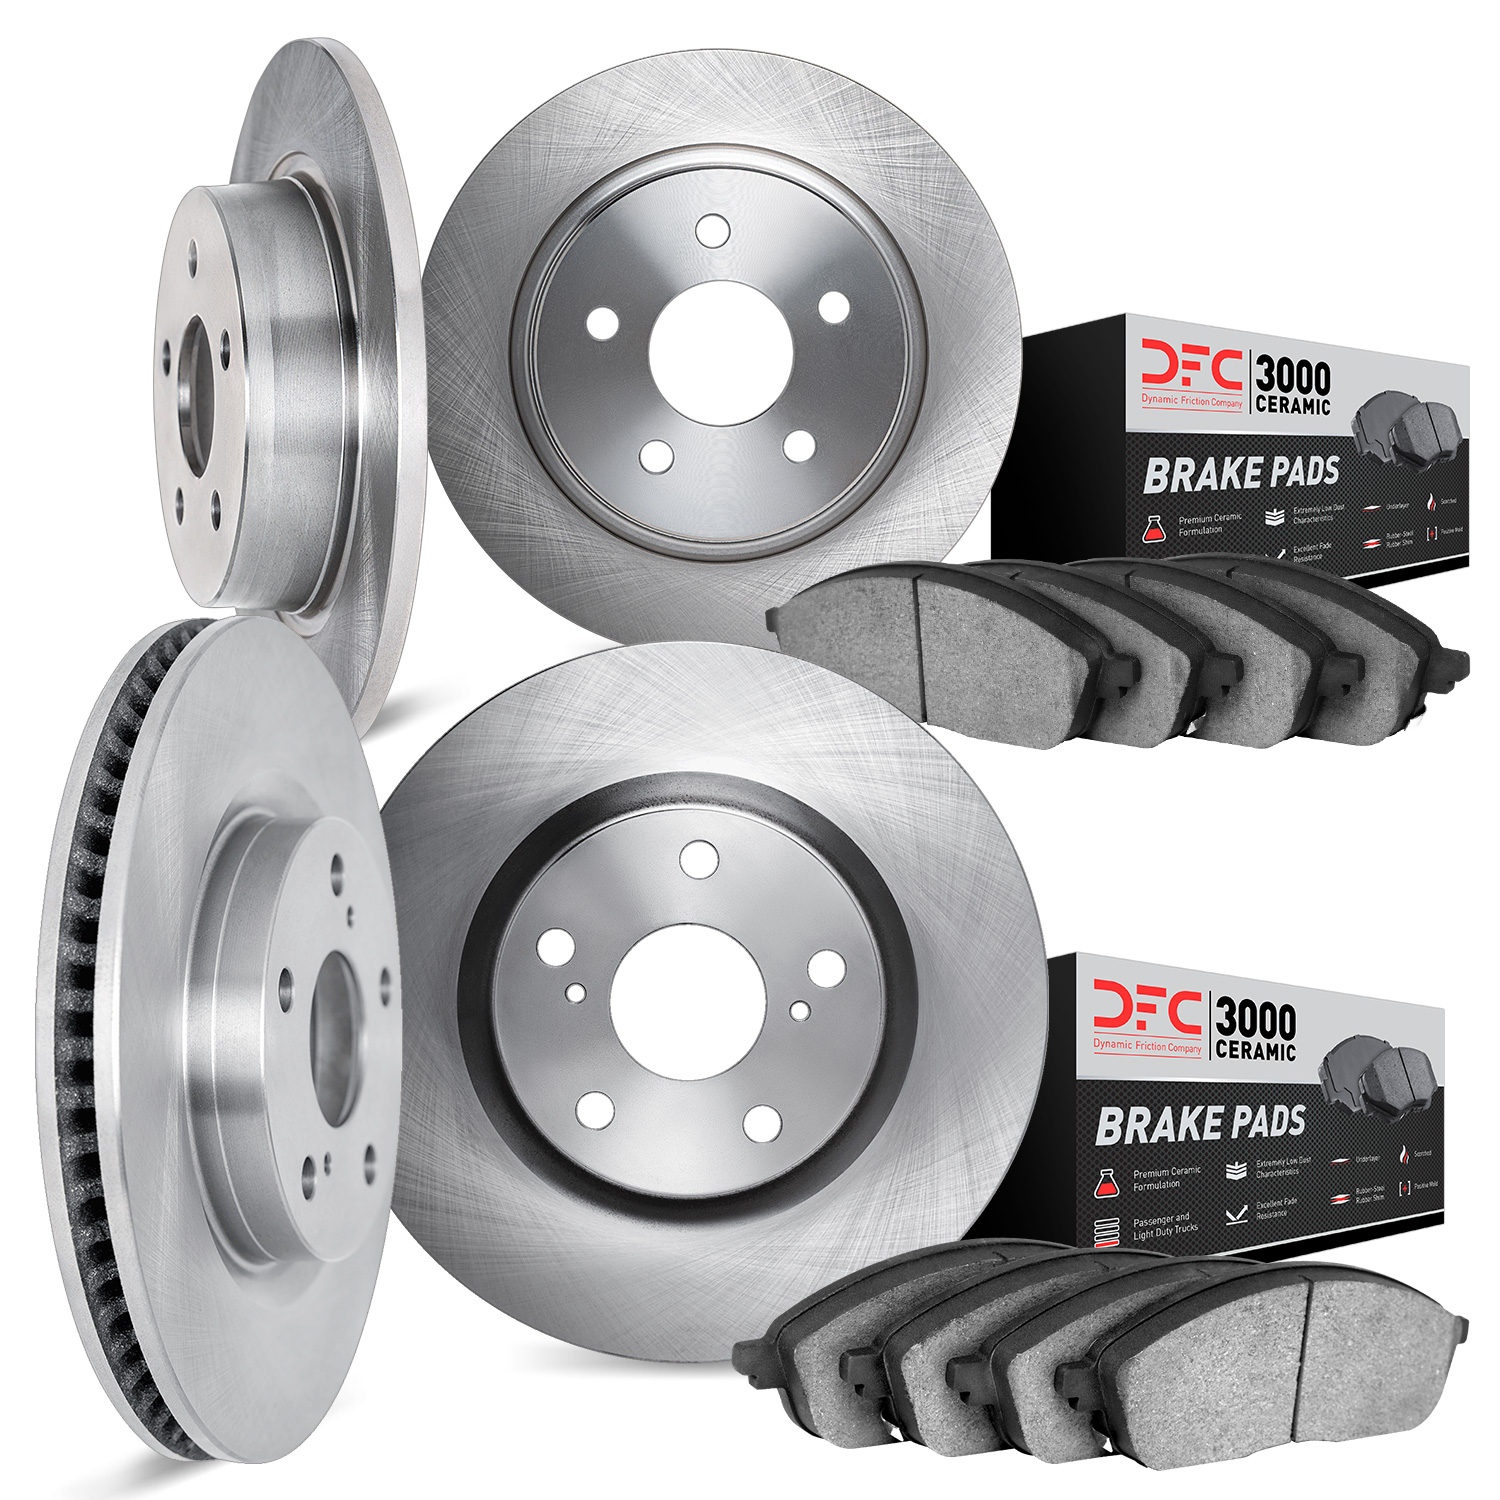 6304-75007 Brake Rotors with 3000-Series Ceramic Brake Pads Kit, 1998-2010 Lexus/Toyota/Scion, Position: Front and Rear